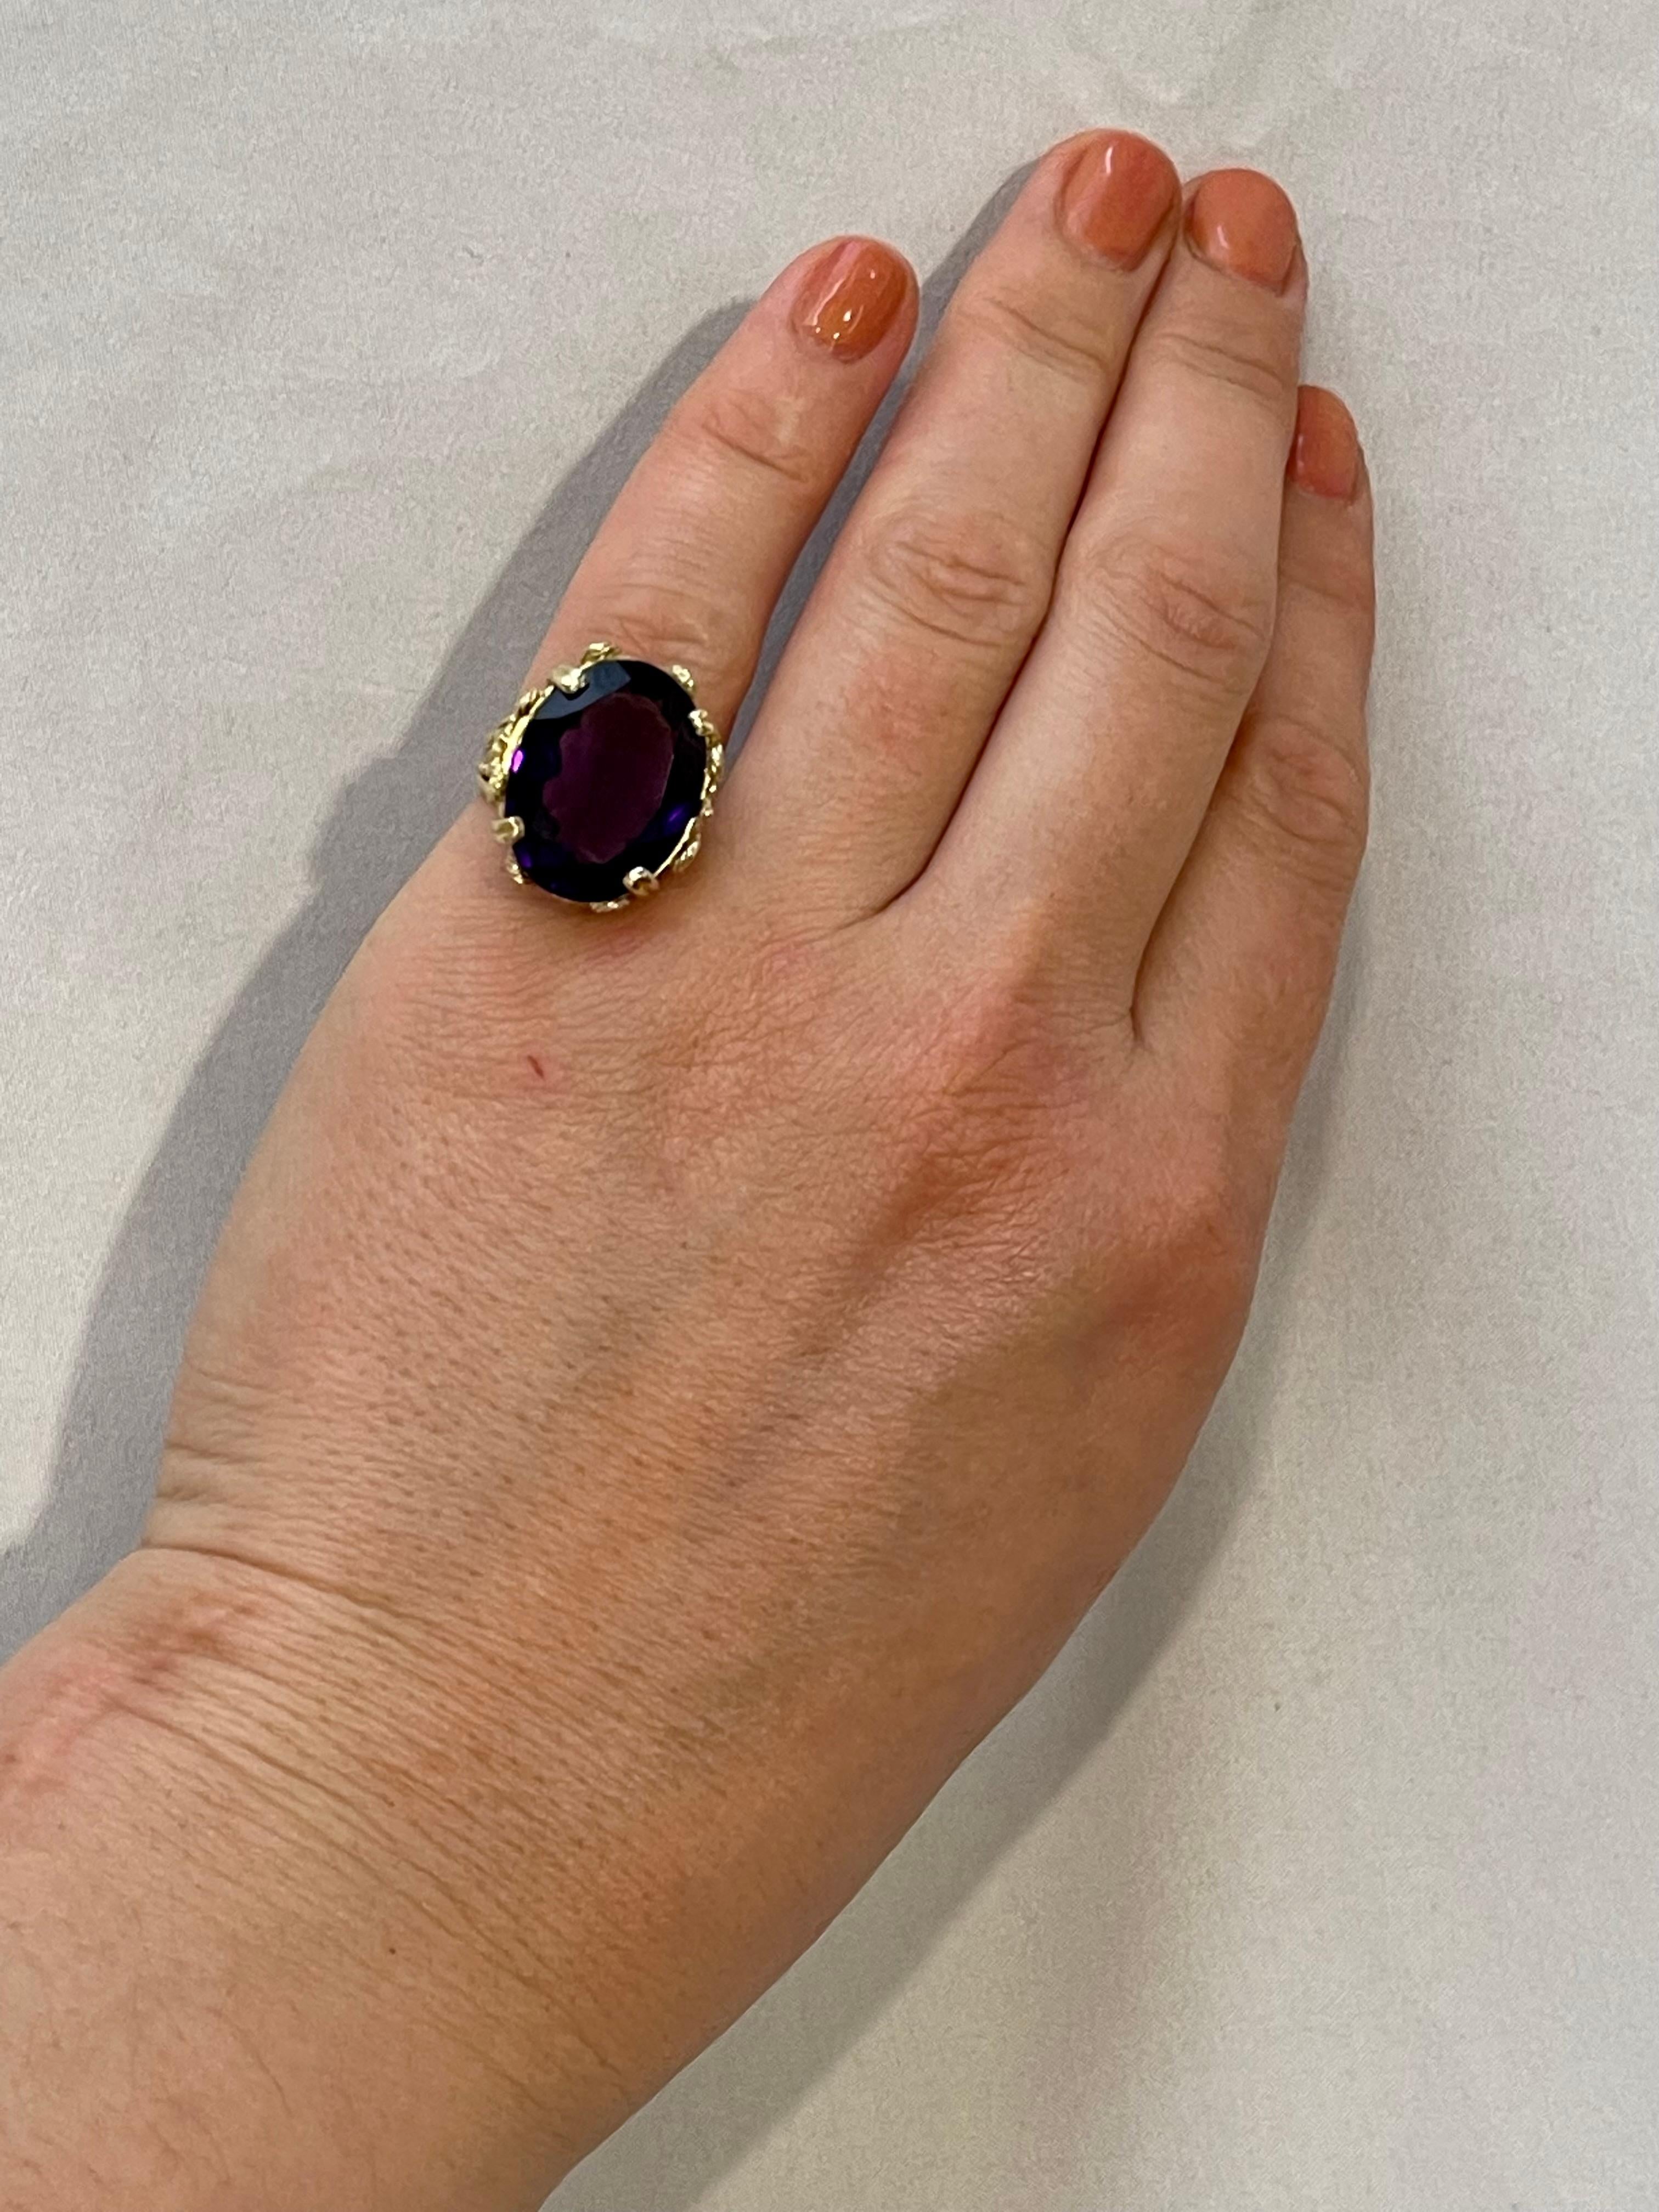 13 Carat Oval Bolivian Amethyst Cocktail Ring in 14 Karat Yellow Gold For Sale 5